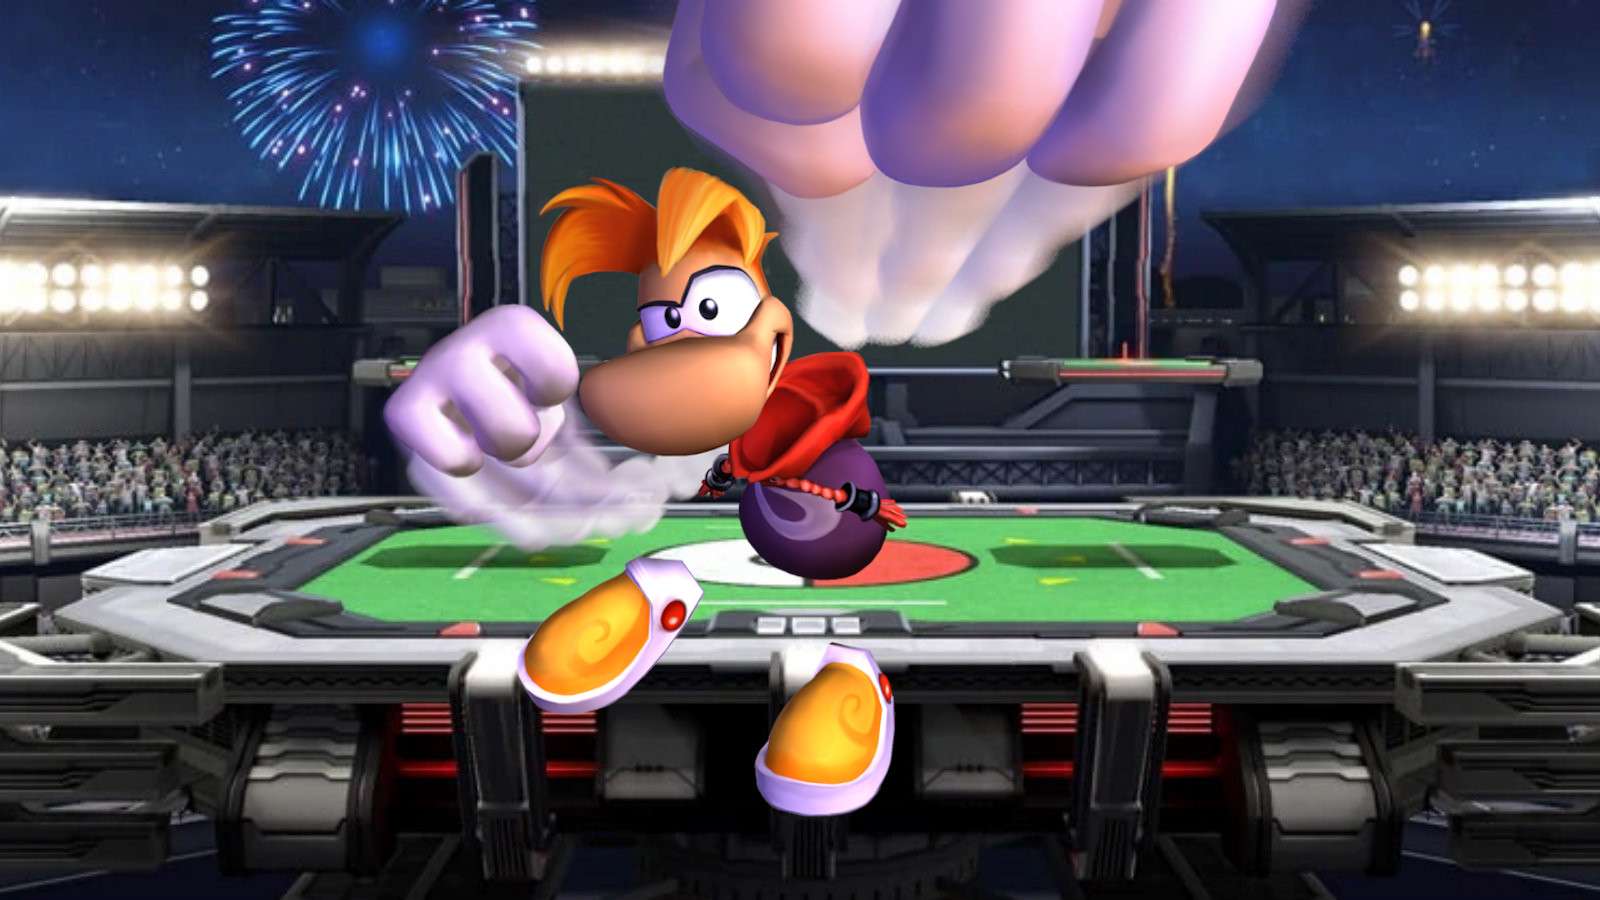 Will Rayman come to Smash Ultimate?